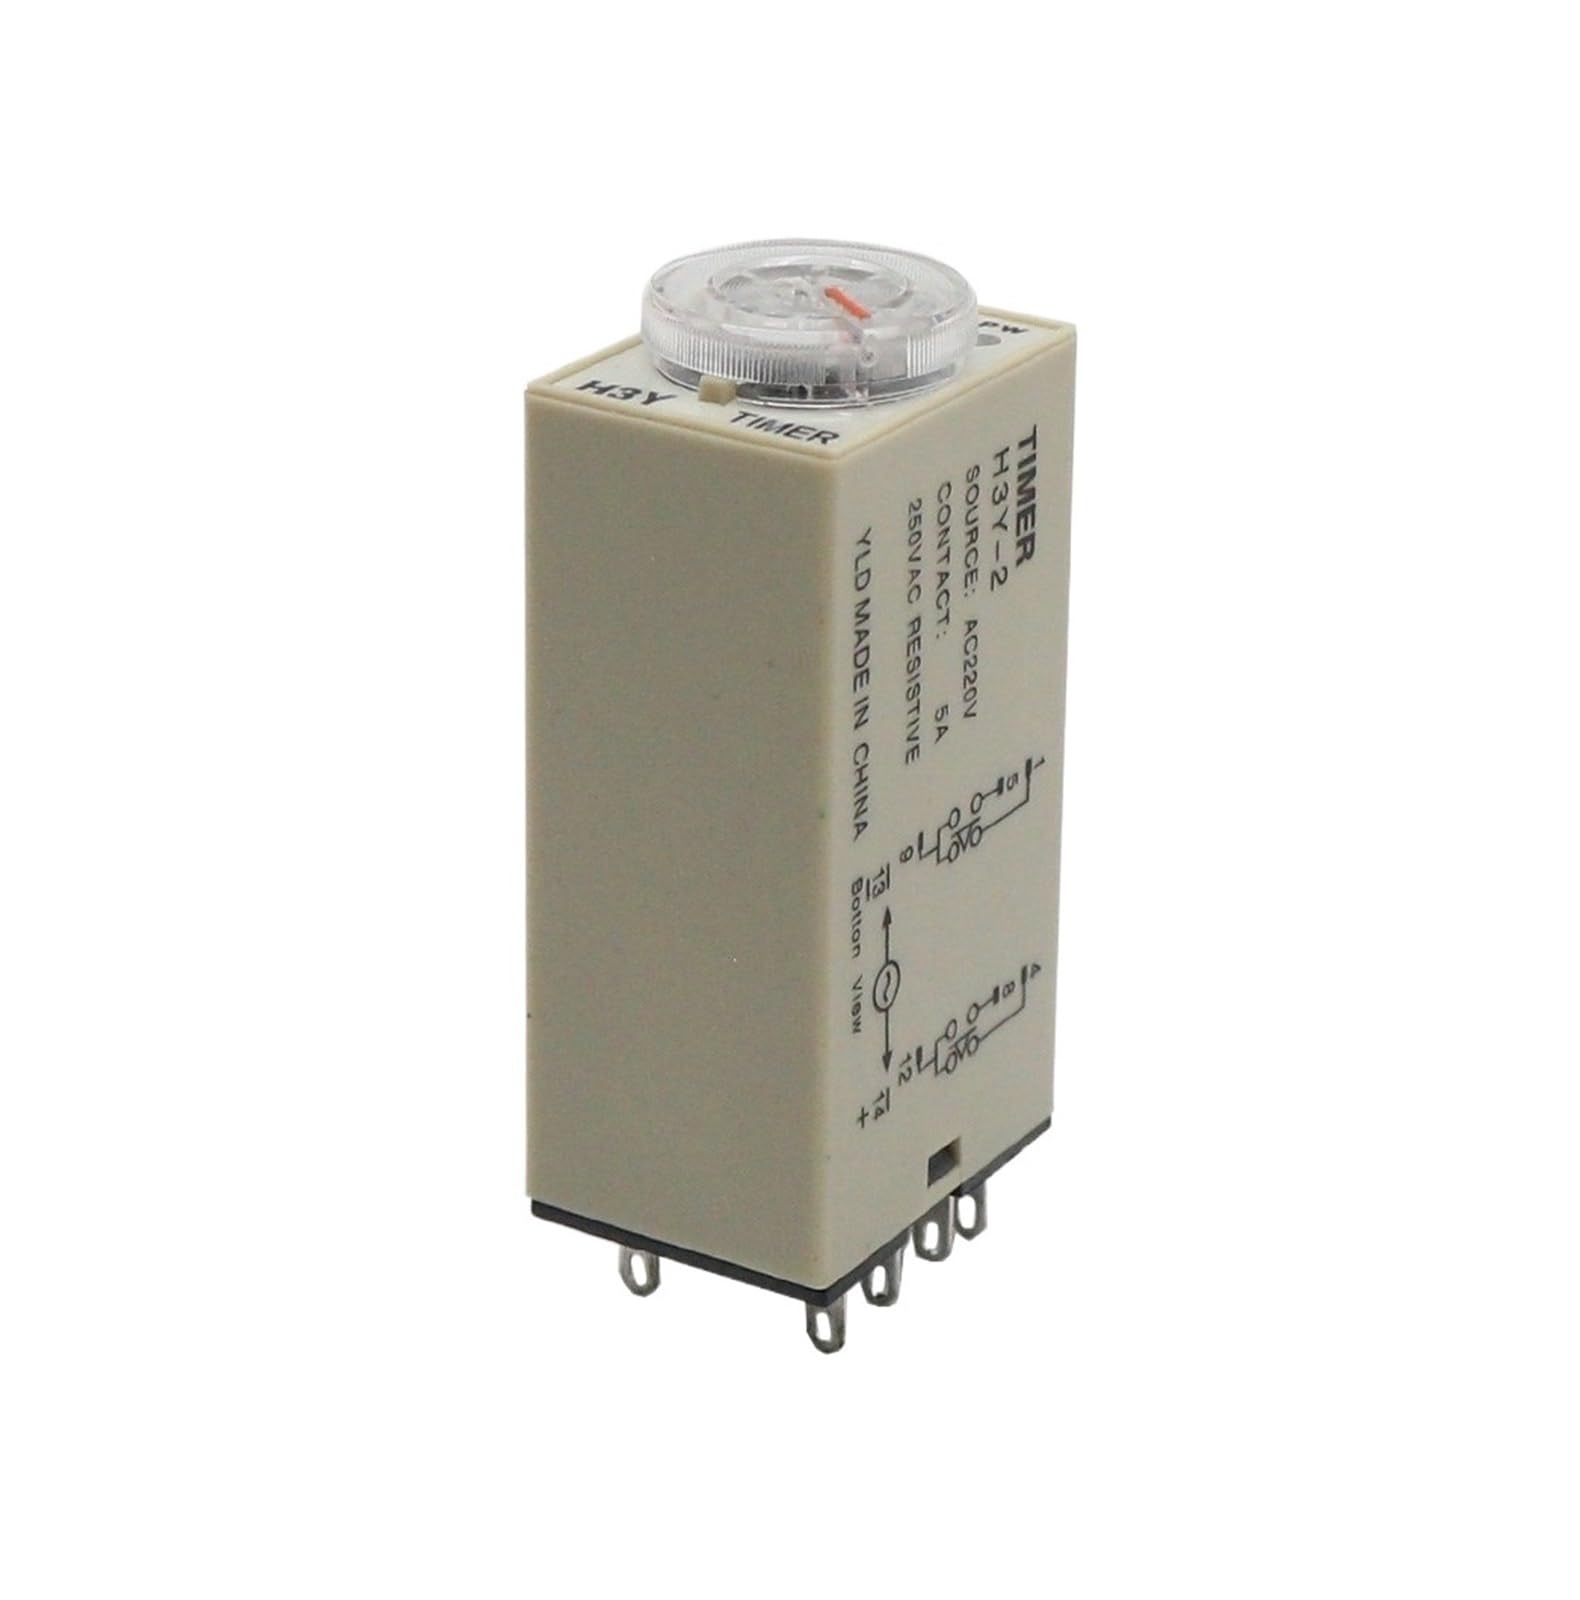 1pcs Power on Delay Time Relay H3Y-2 Small 8-pinDC12V24vAC220v Timer Switch 1S 3S 5S 30S 60S 5M 10M 30M 60M OSBCMZGE(DC 12V,H3Y-2 1Minute) von OSBCMZGE